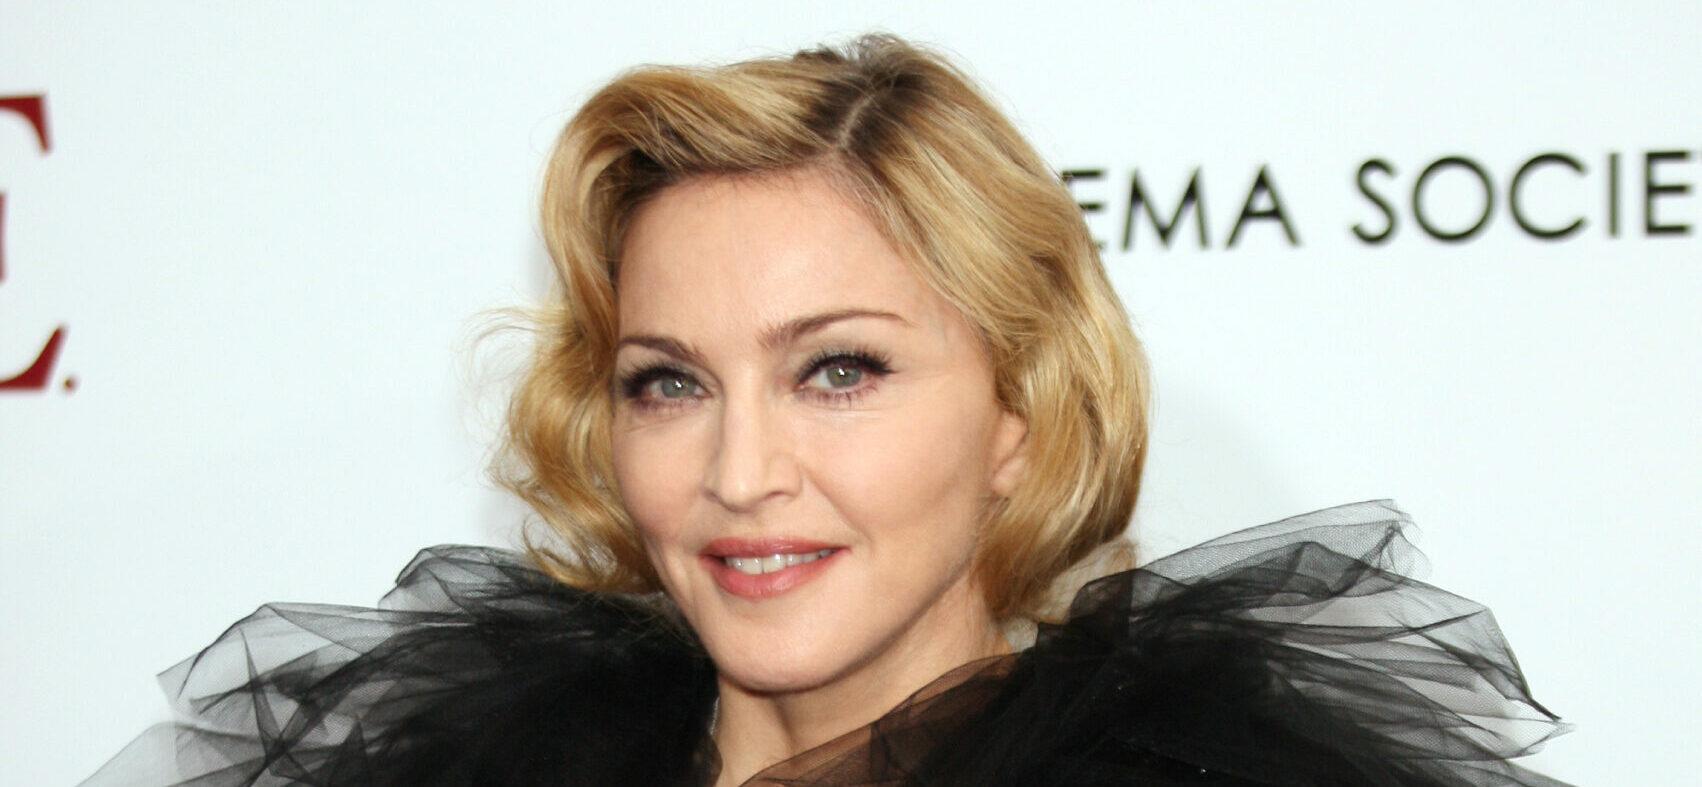 Madonna Looks Radiant In New Snaps Holding Roses And A Plushy Amid Recovery From Bacterial Infection